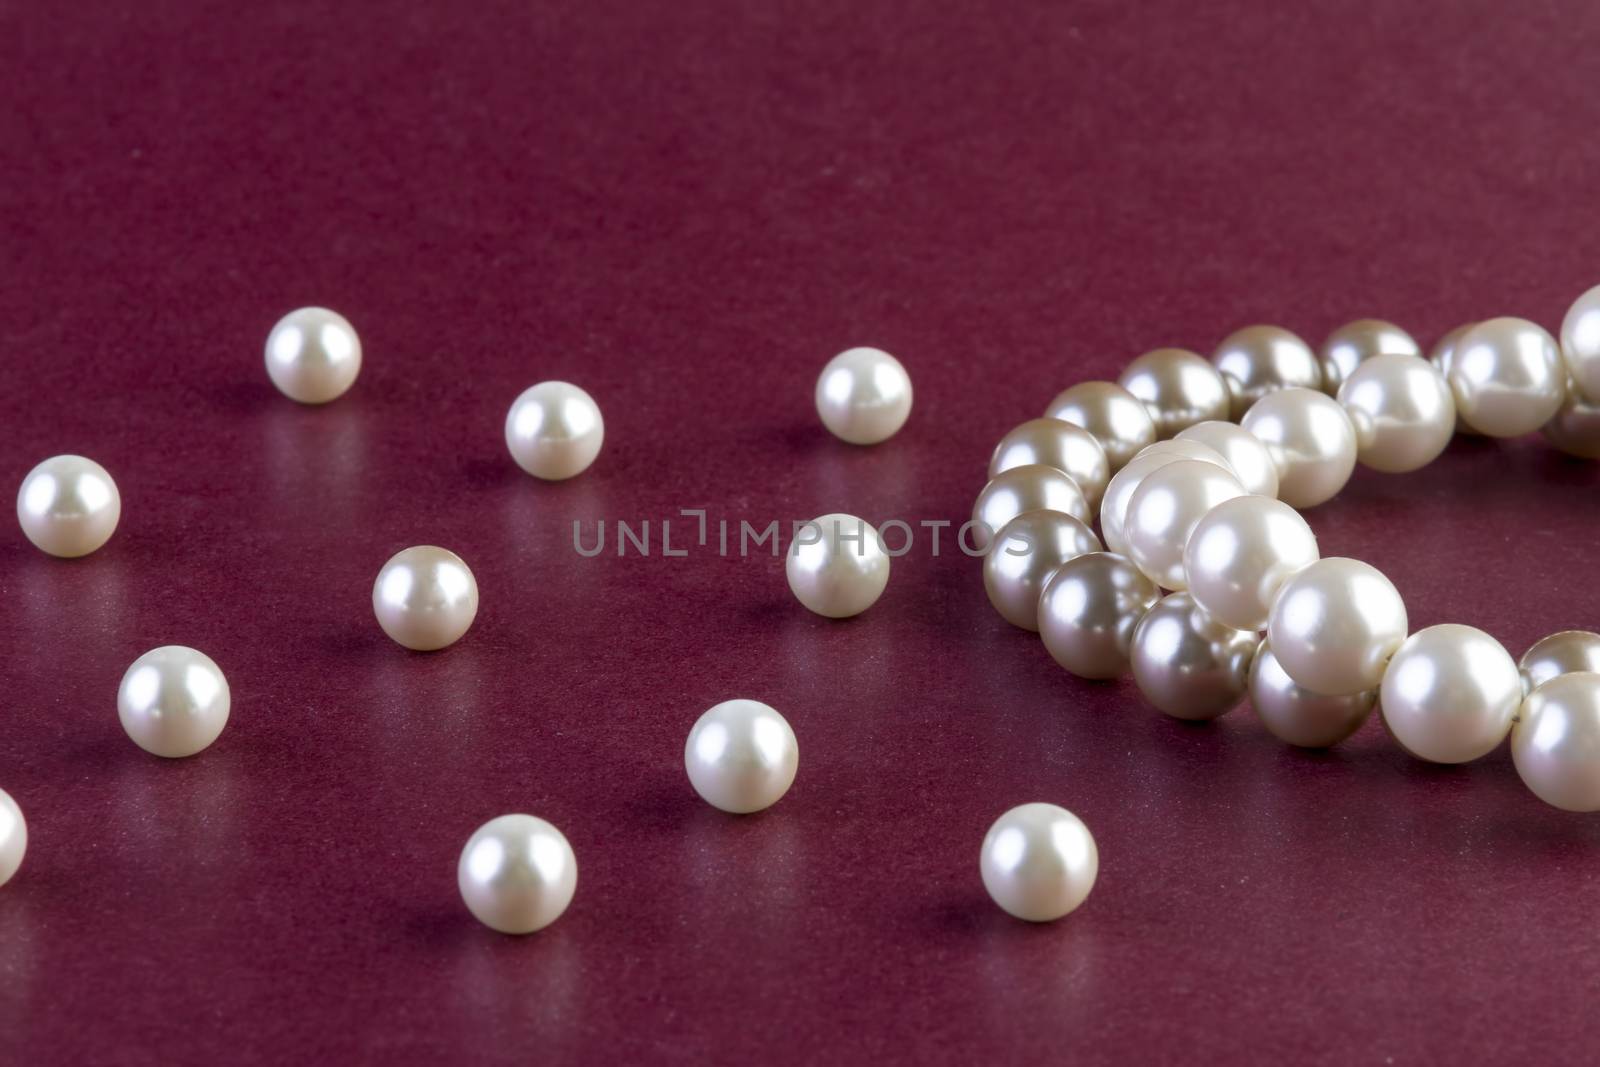 Silver and White pearls necklace on dark red  by manaemedia